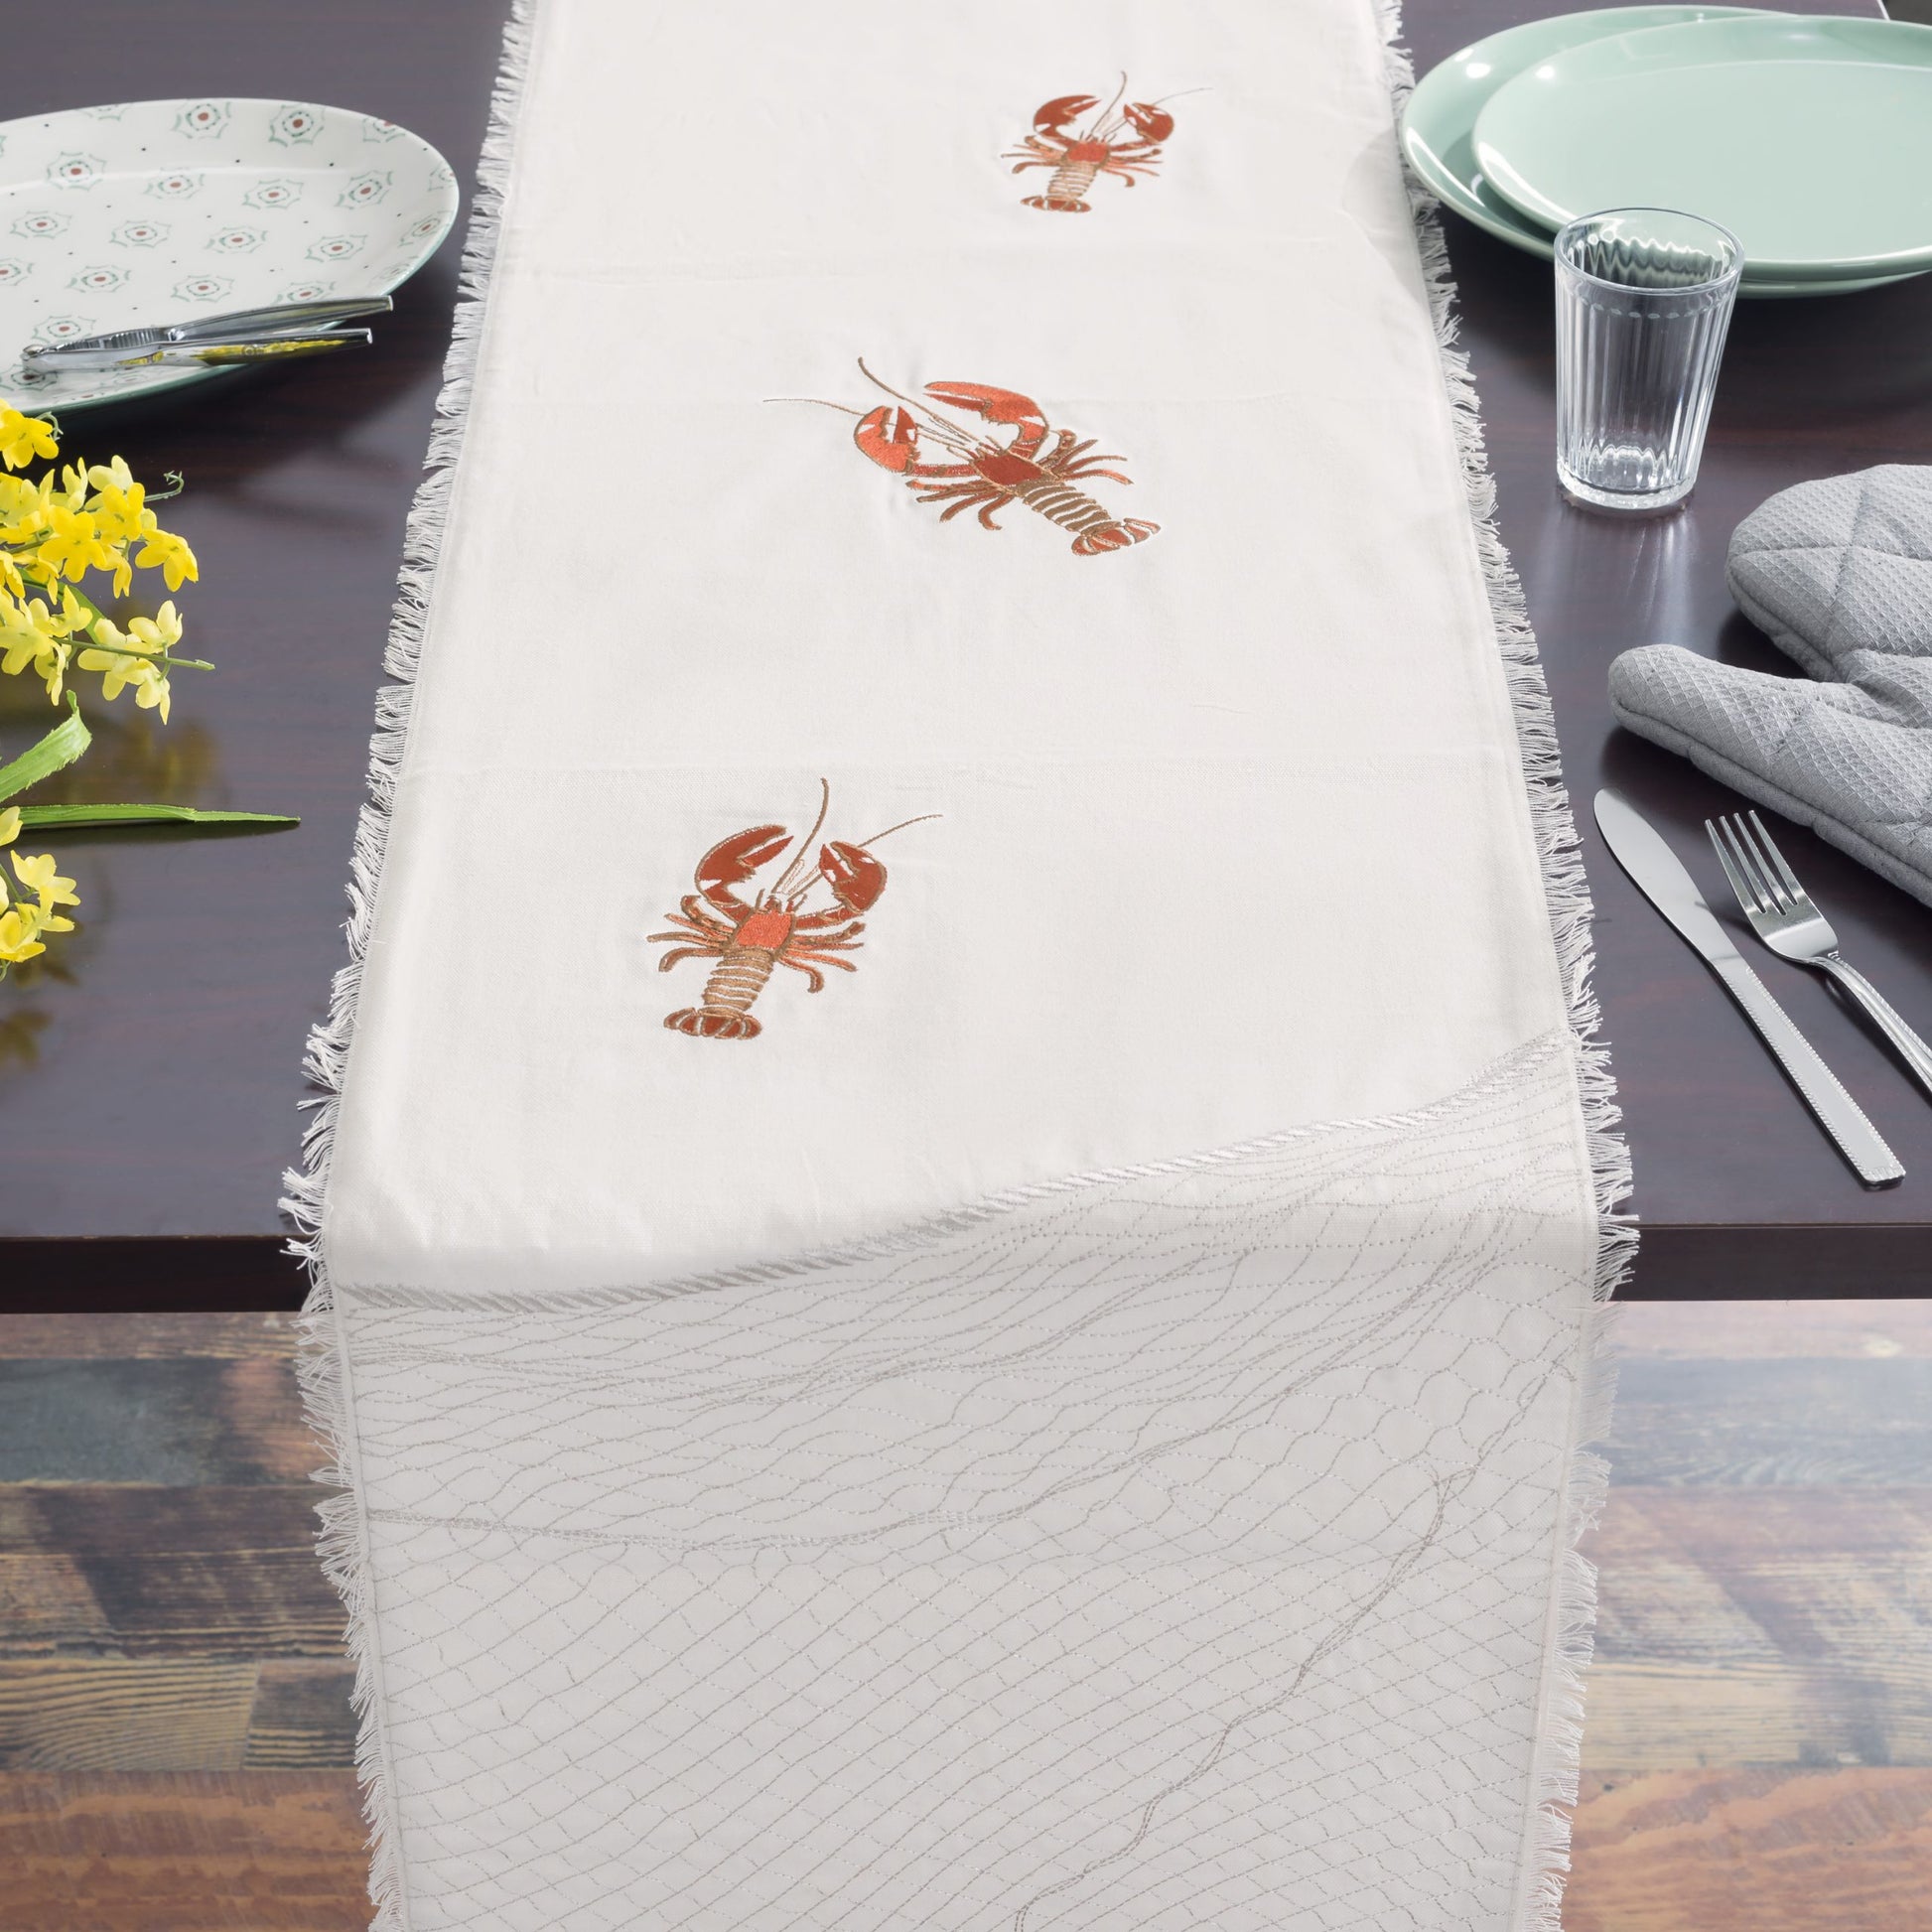 Natural fringed cotton table runner featuring embroidered red lobsters set on table with dishes.